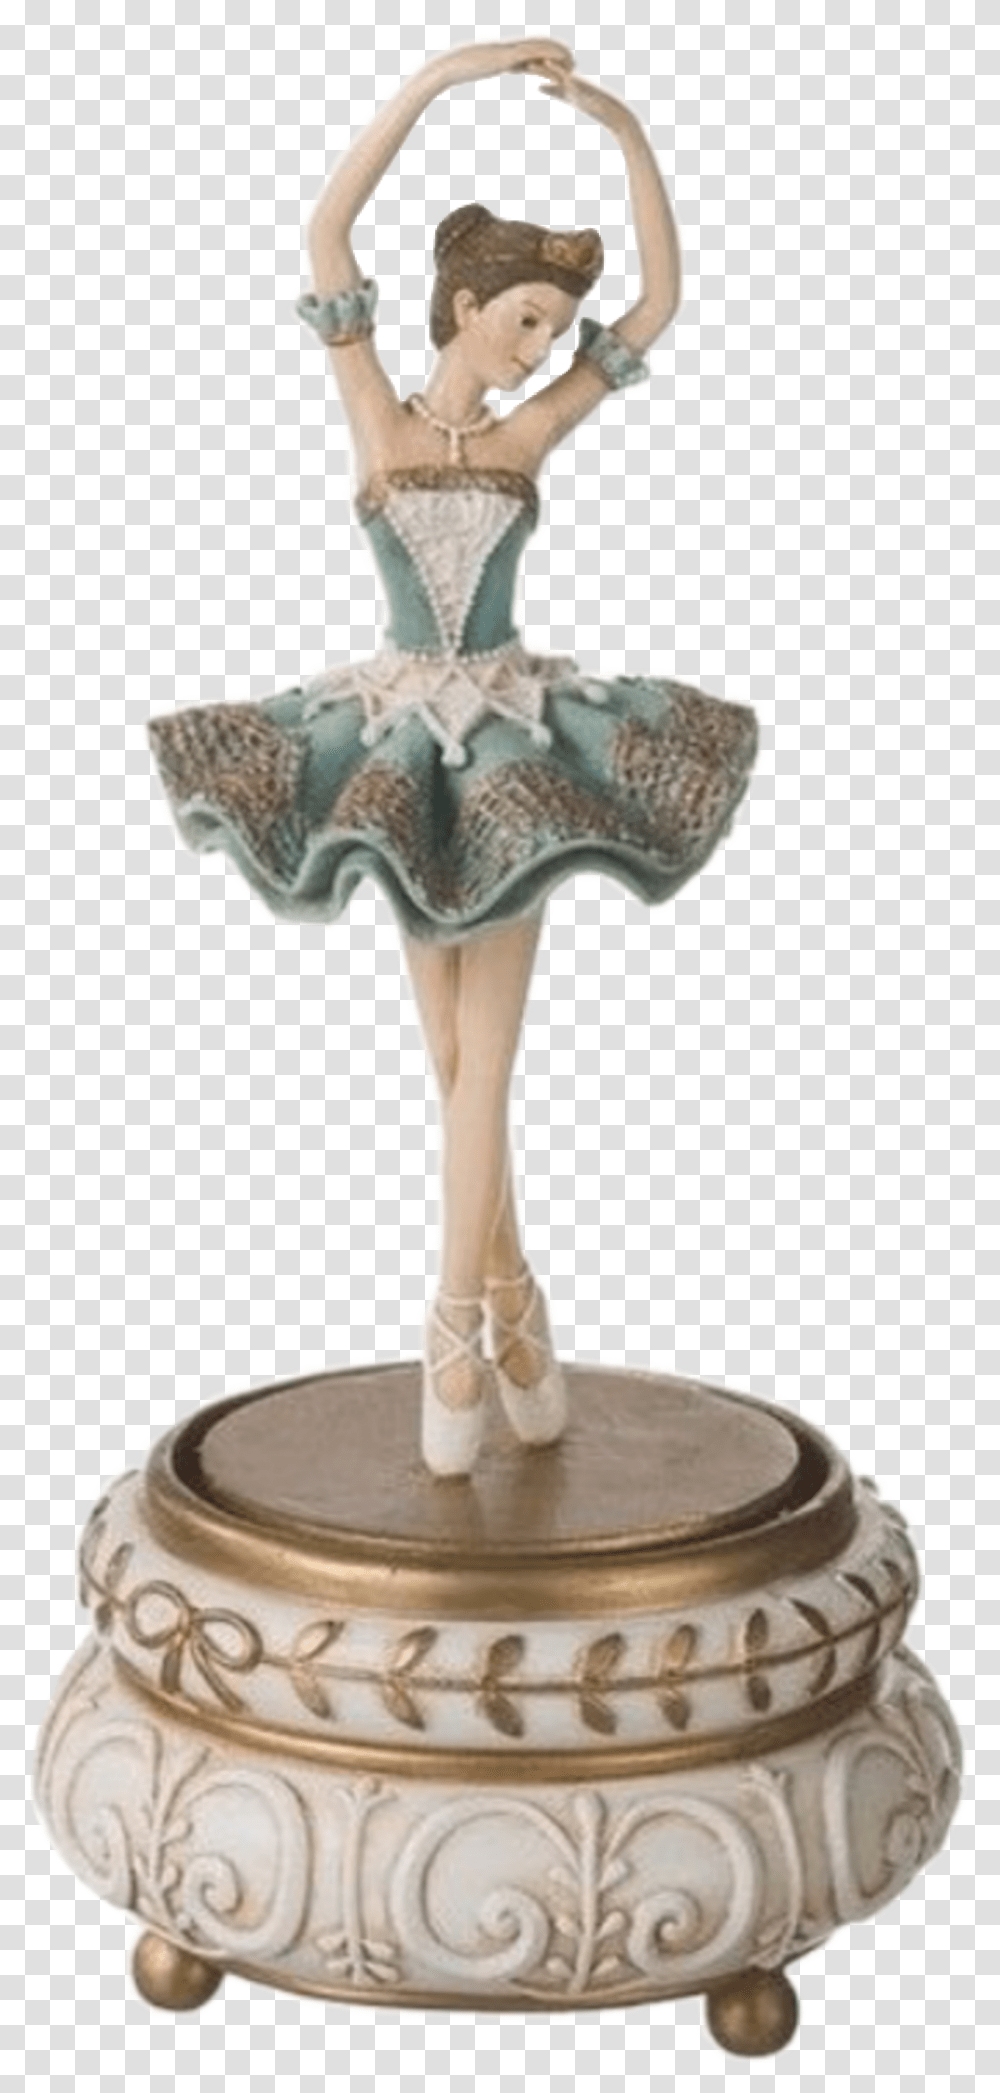 Ballerina Toy Musicbox Aesthetic Freetoedit Glass Music Box With Ballerina, Wedding Cake, Dessert, Food, Person Transparent Png